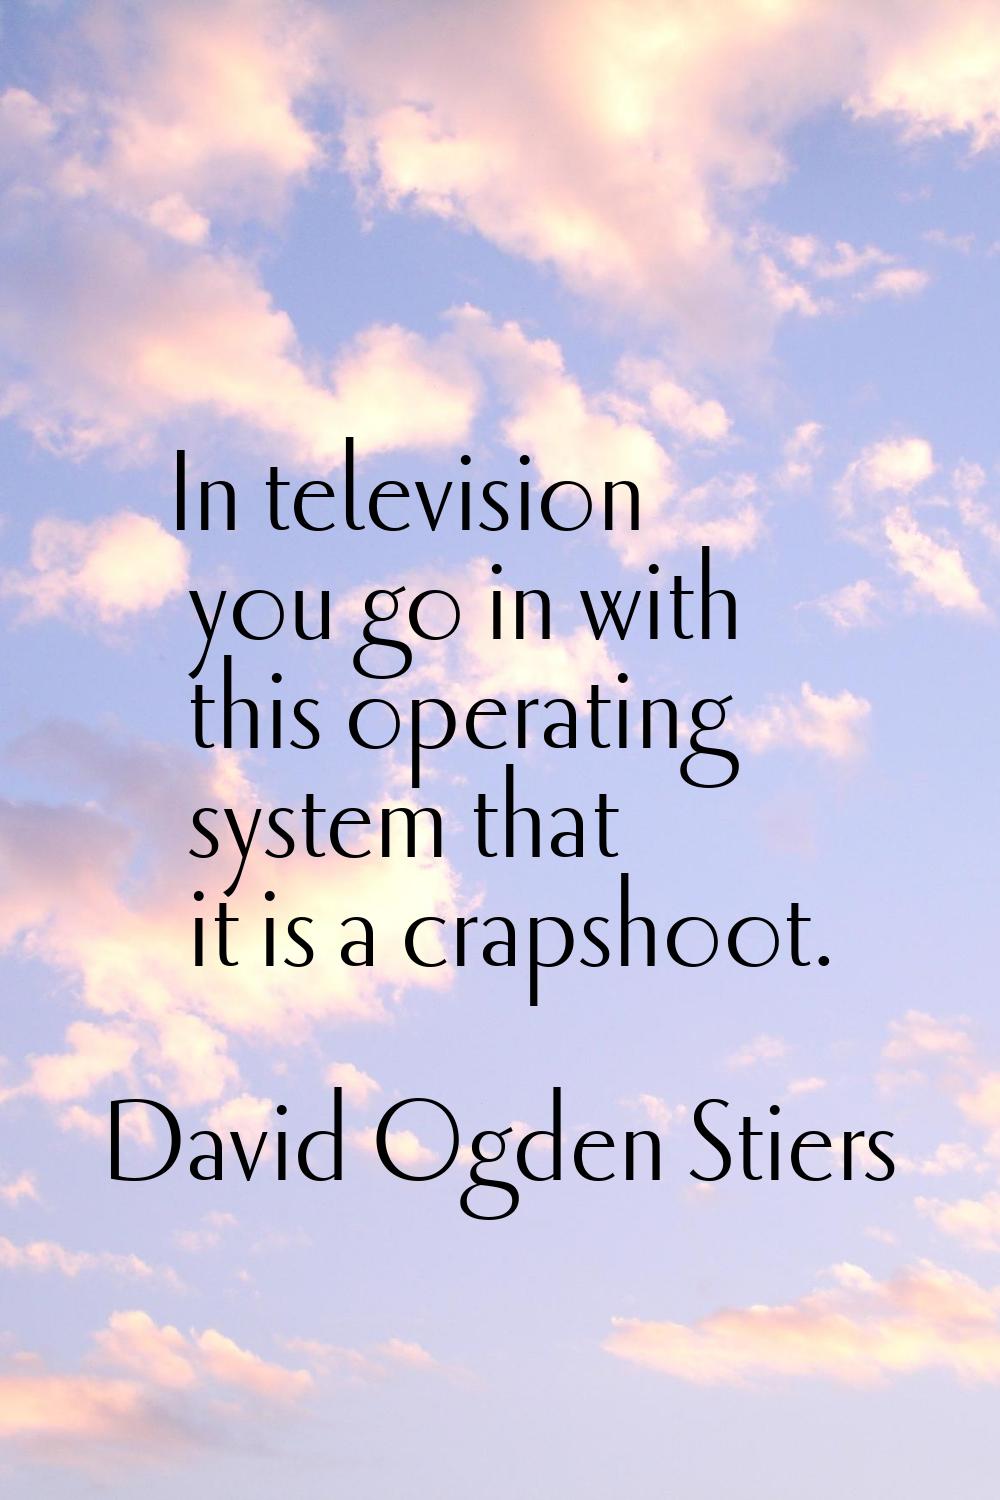 In television you go in with this operating system that it is a crapshoot.